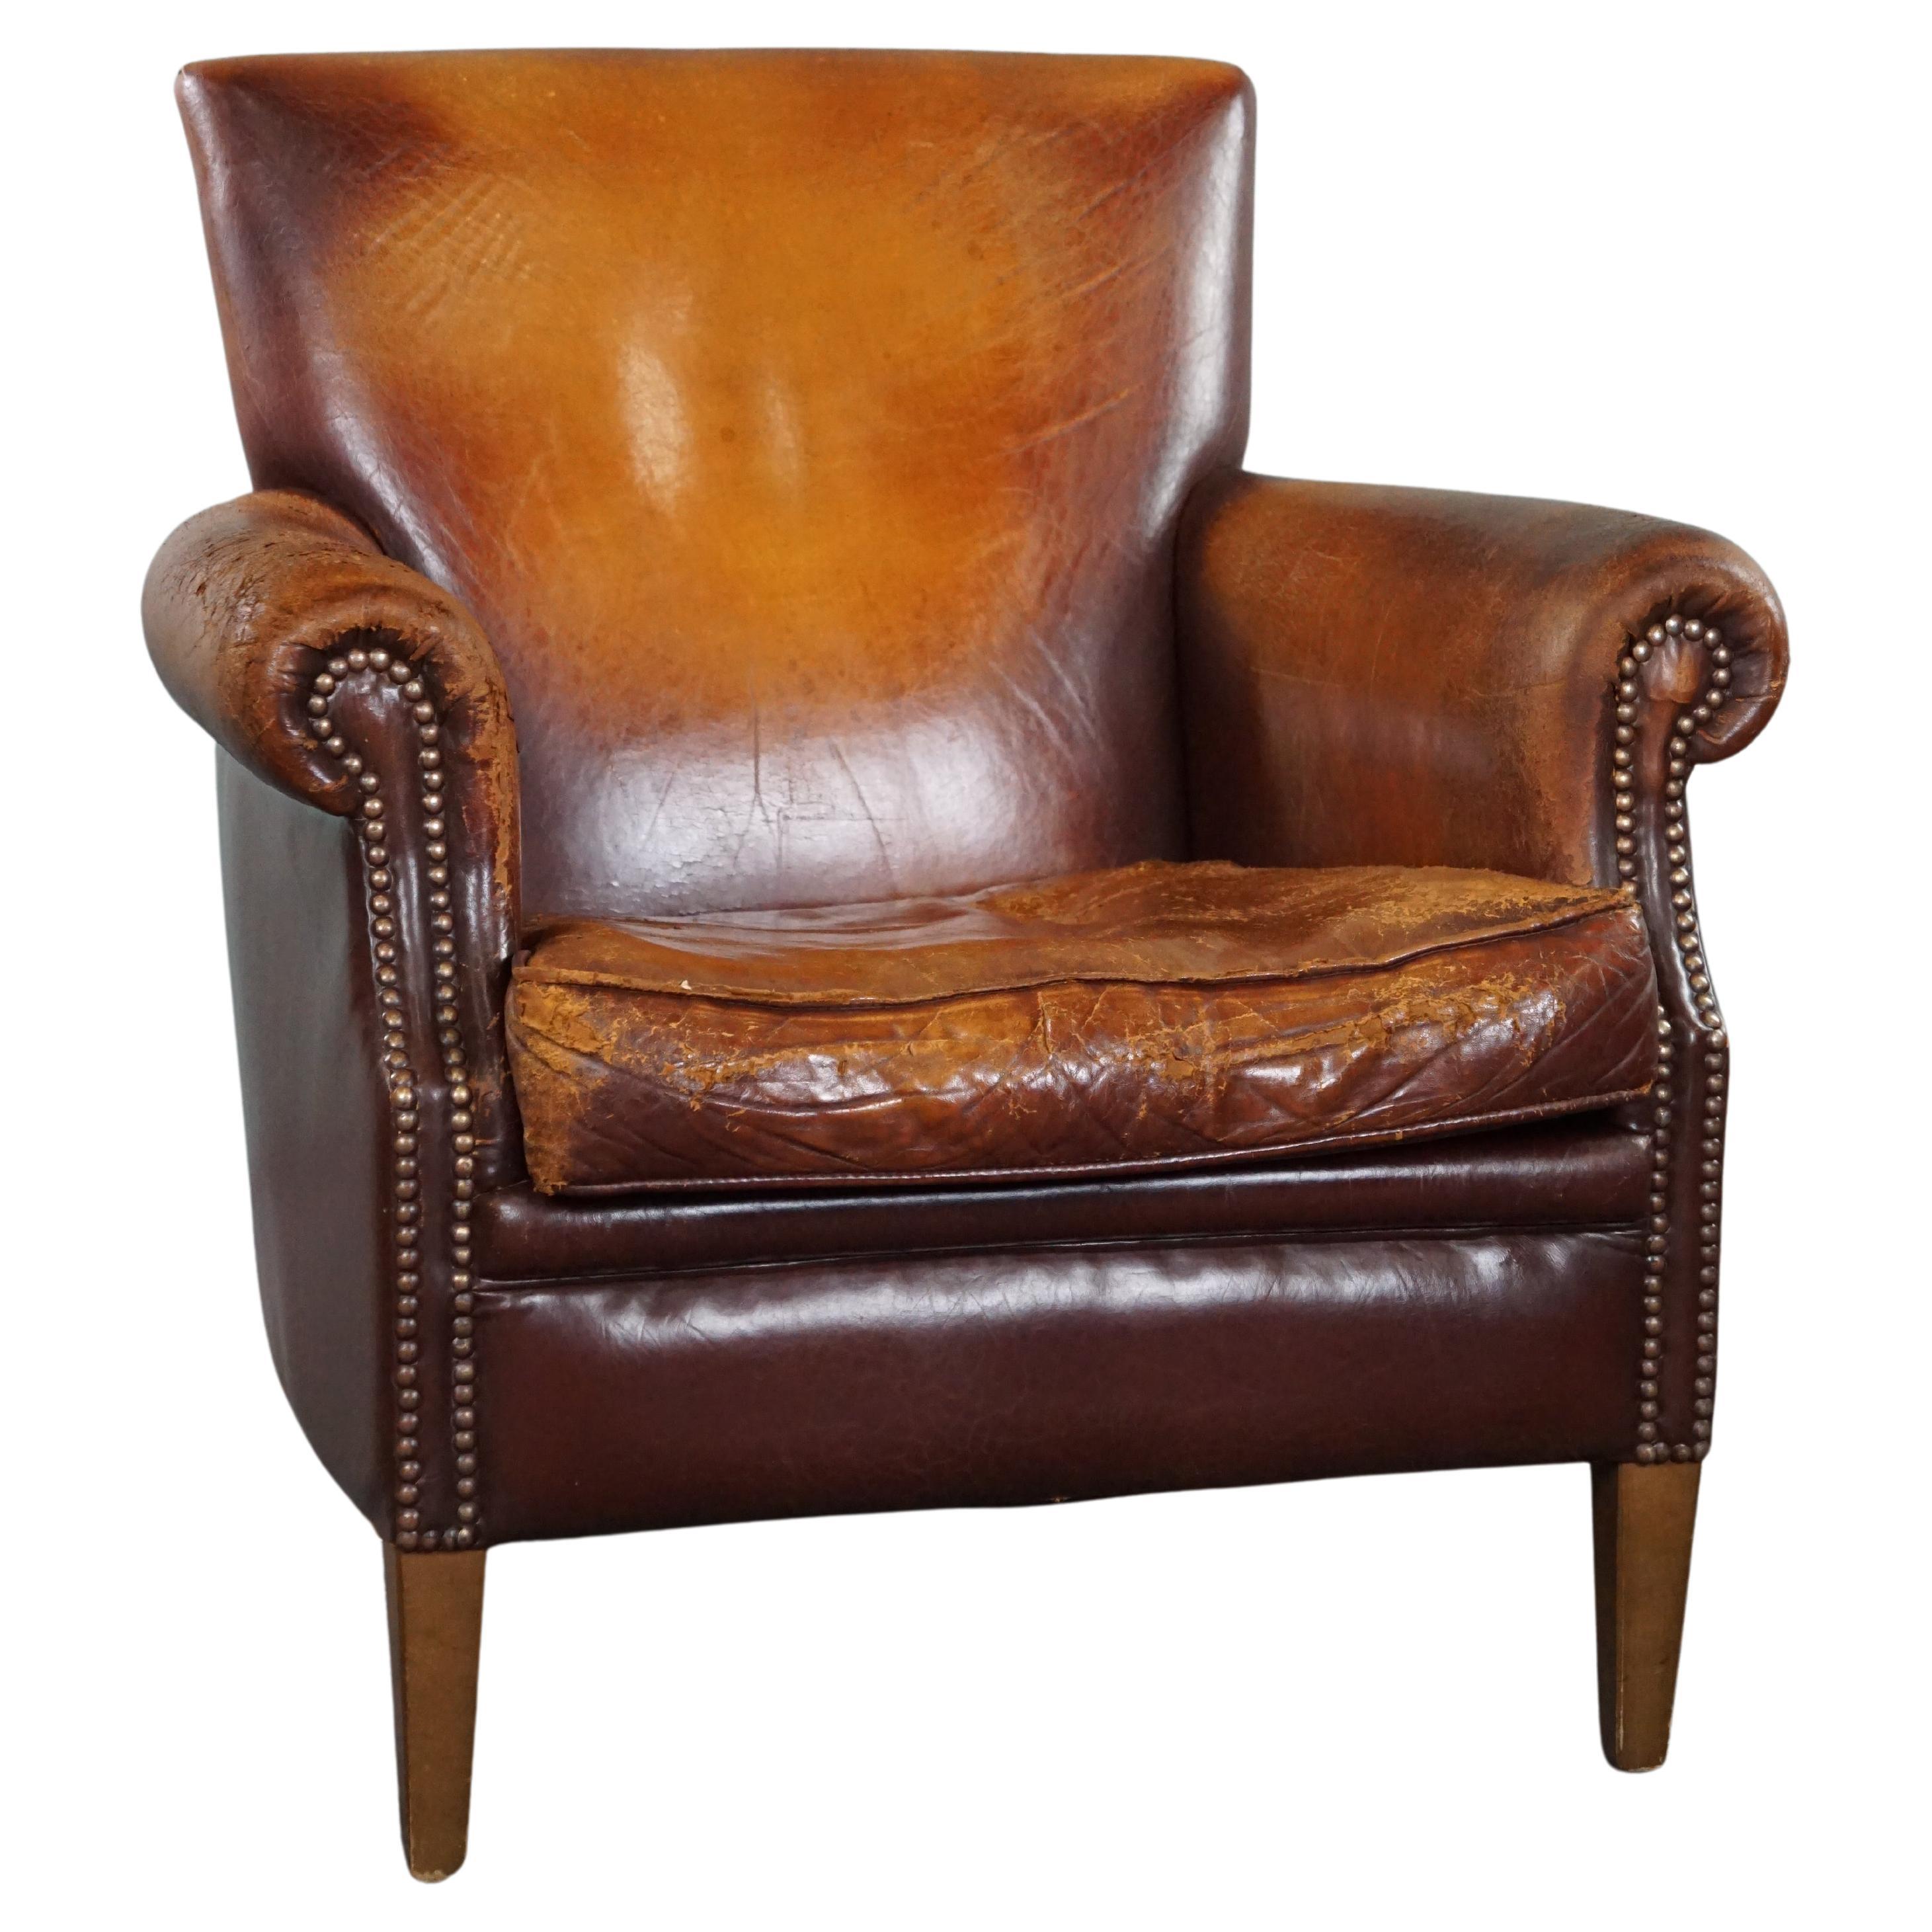 Sturdy sheep leather armchair with a distressed look